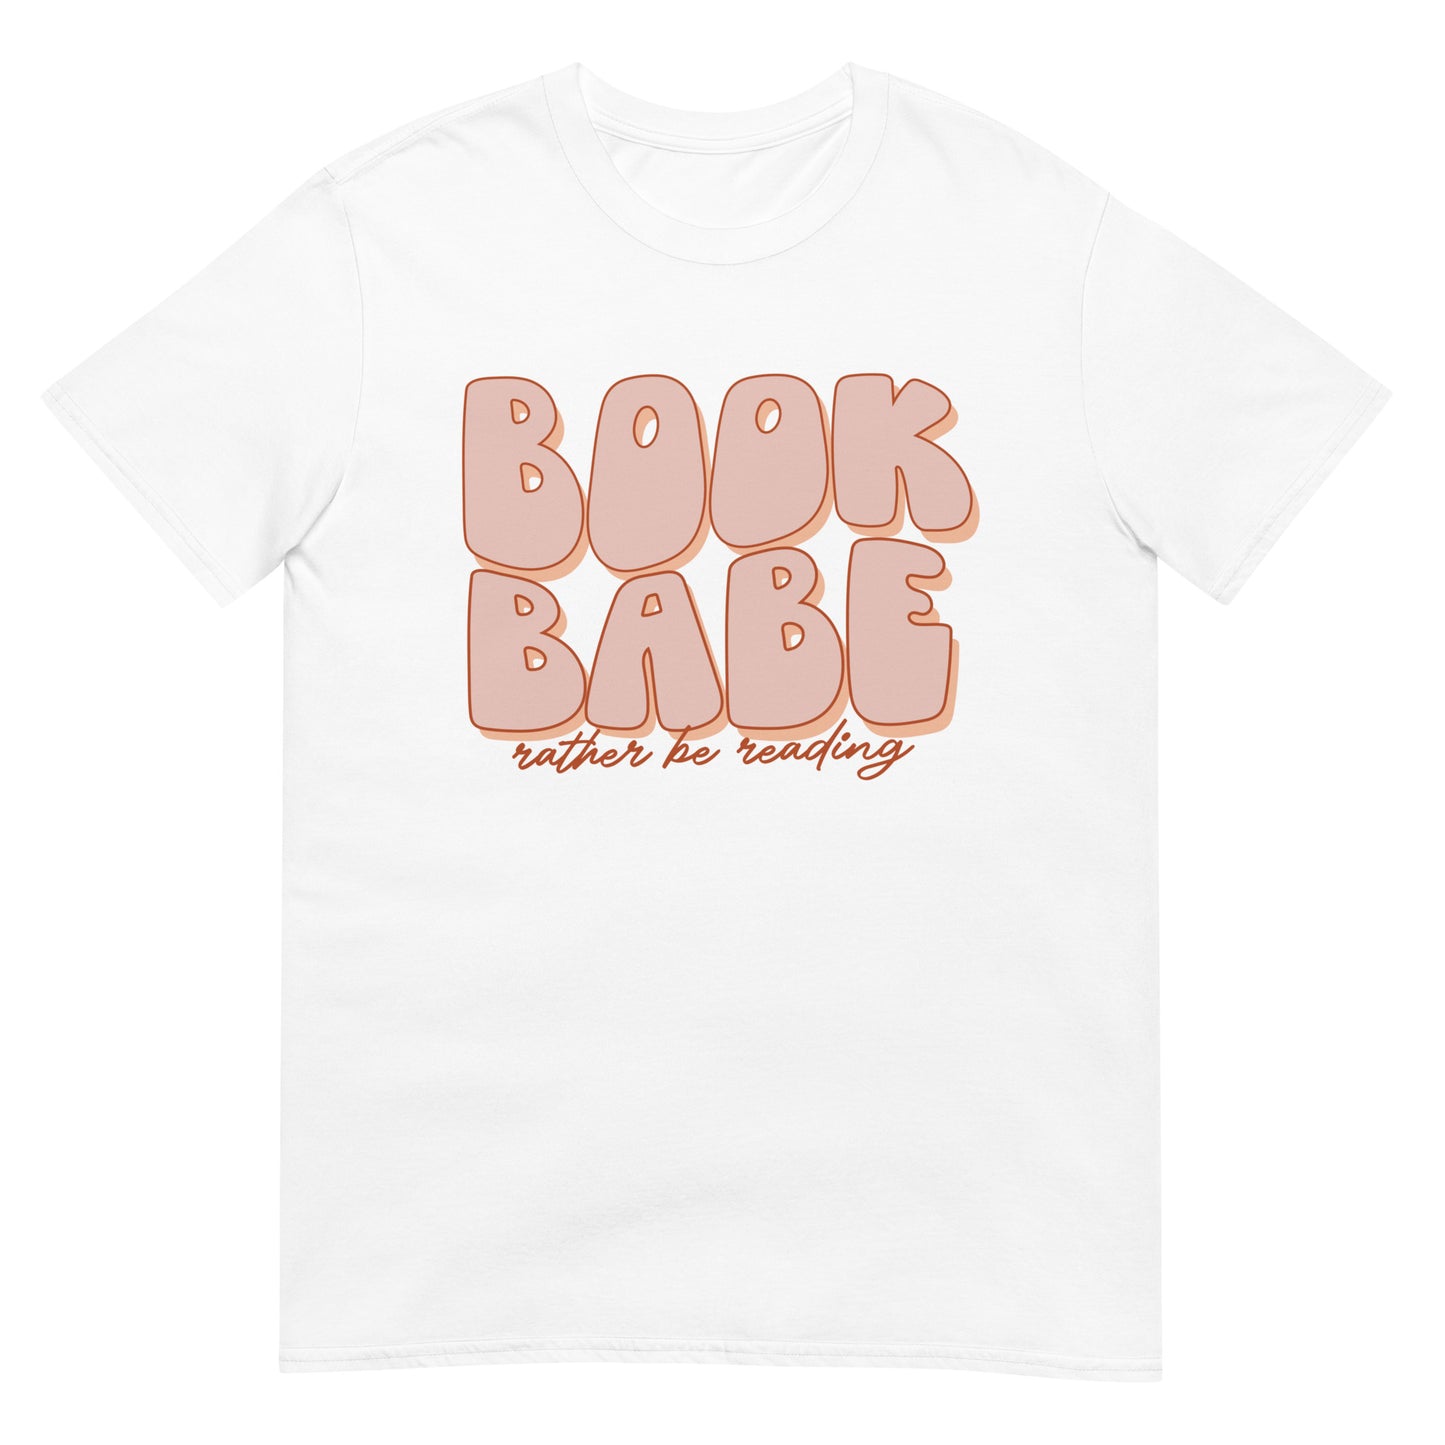 BOOK BABE RATHER BE READING TEE